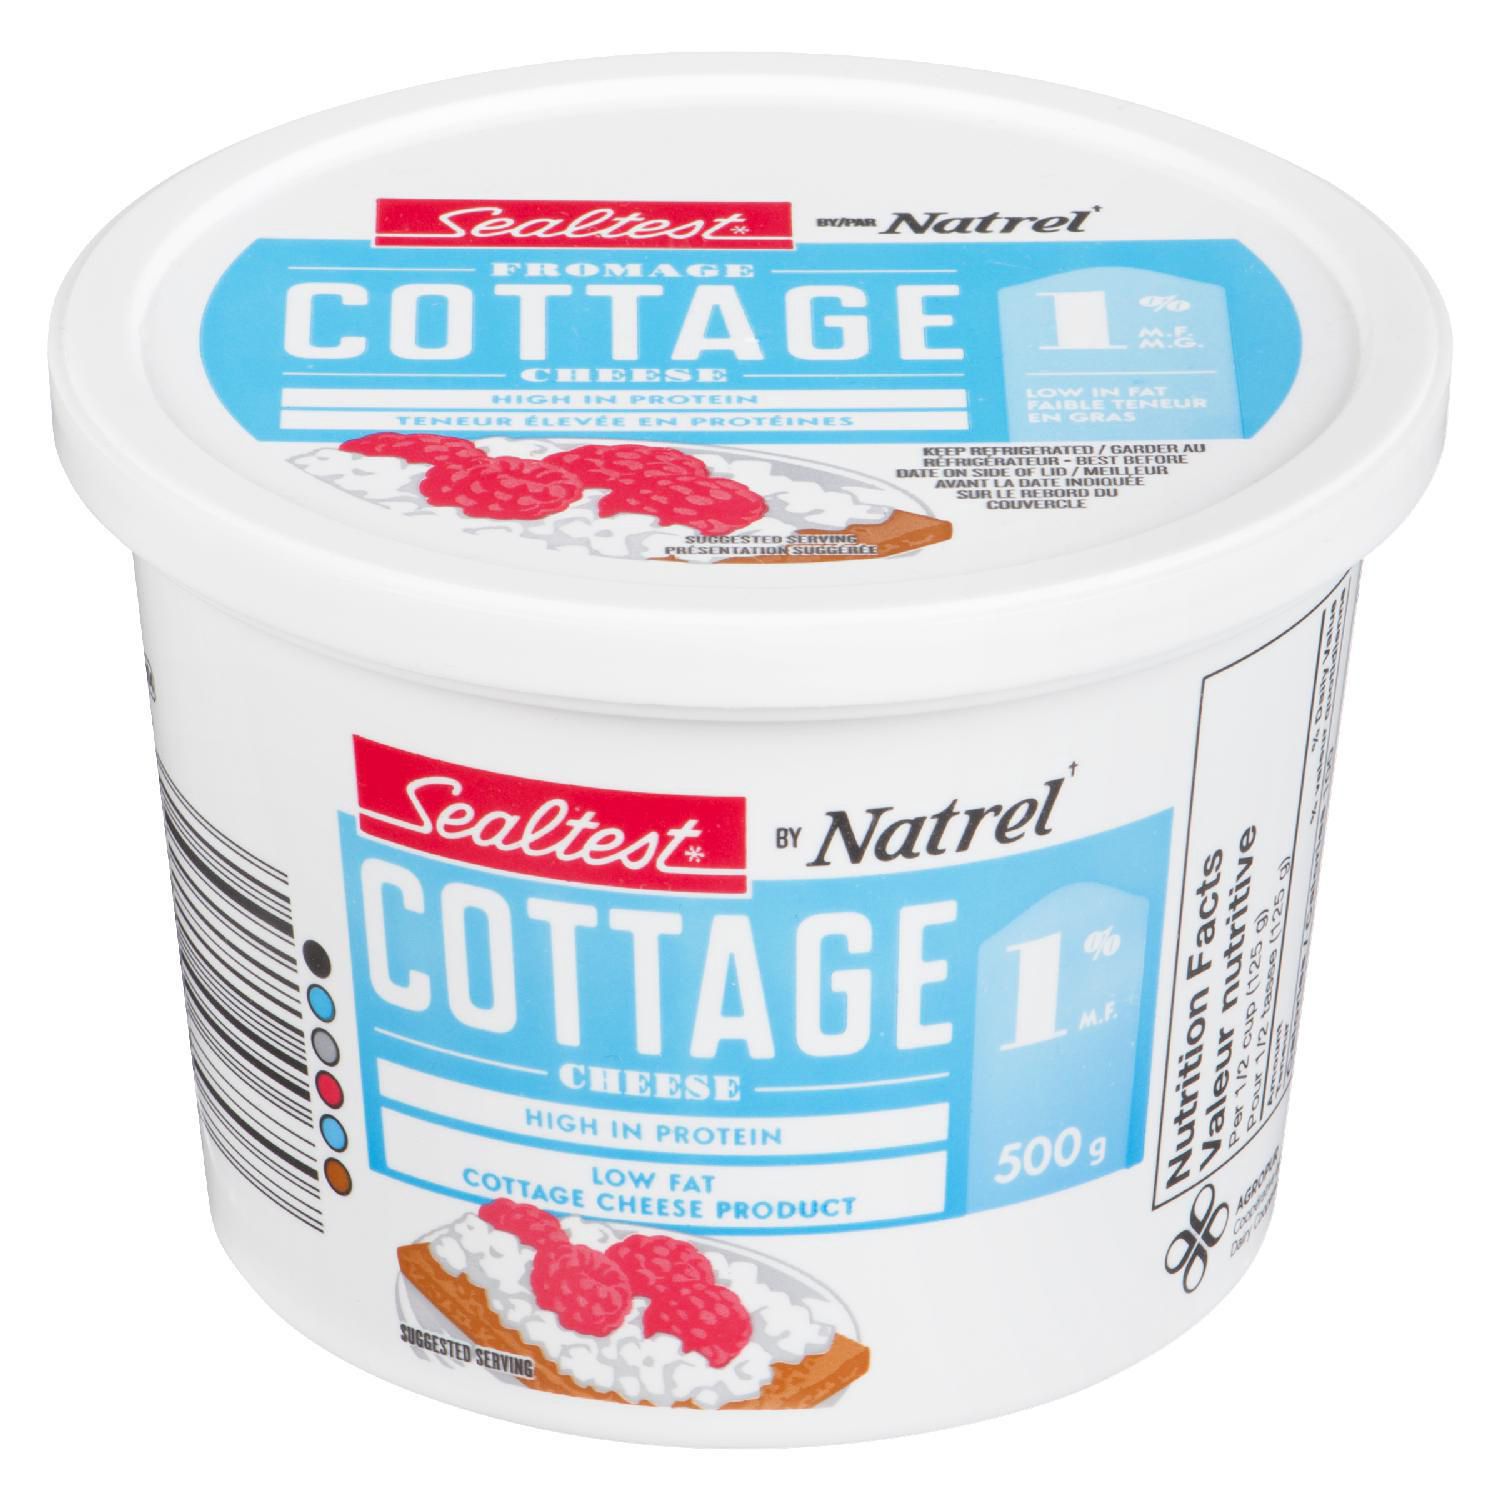 Sealtest By Natrel 1 Cottage Cheese Walmart Canada